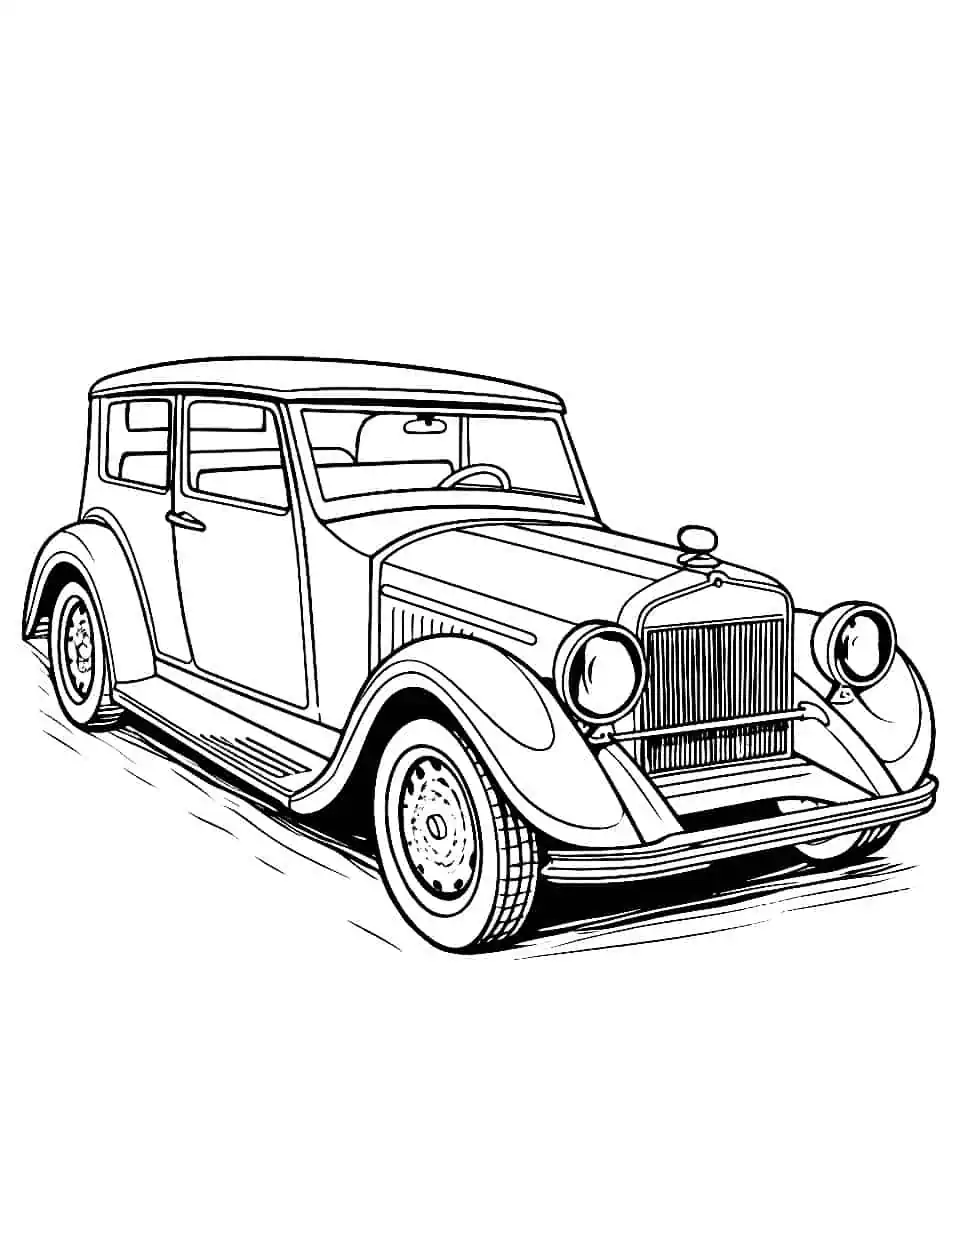 The Antique Automobile Car Coloring Page - A coloring page of an antique car.